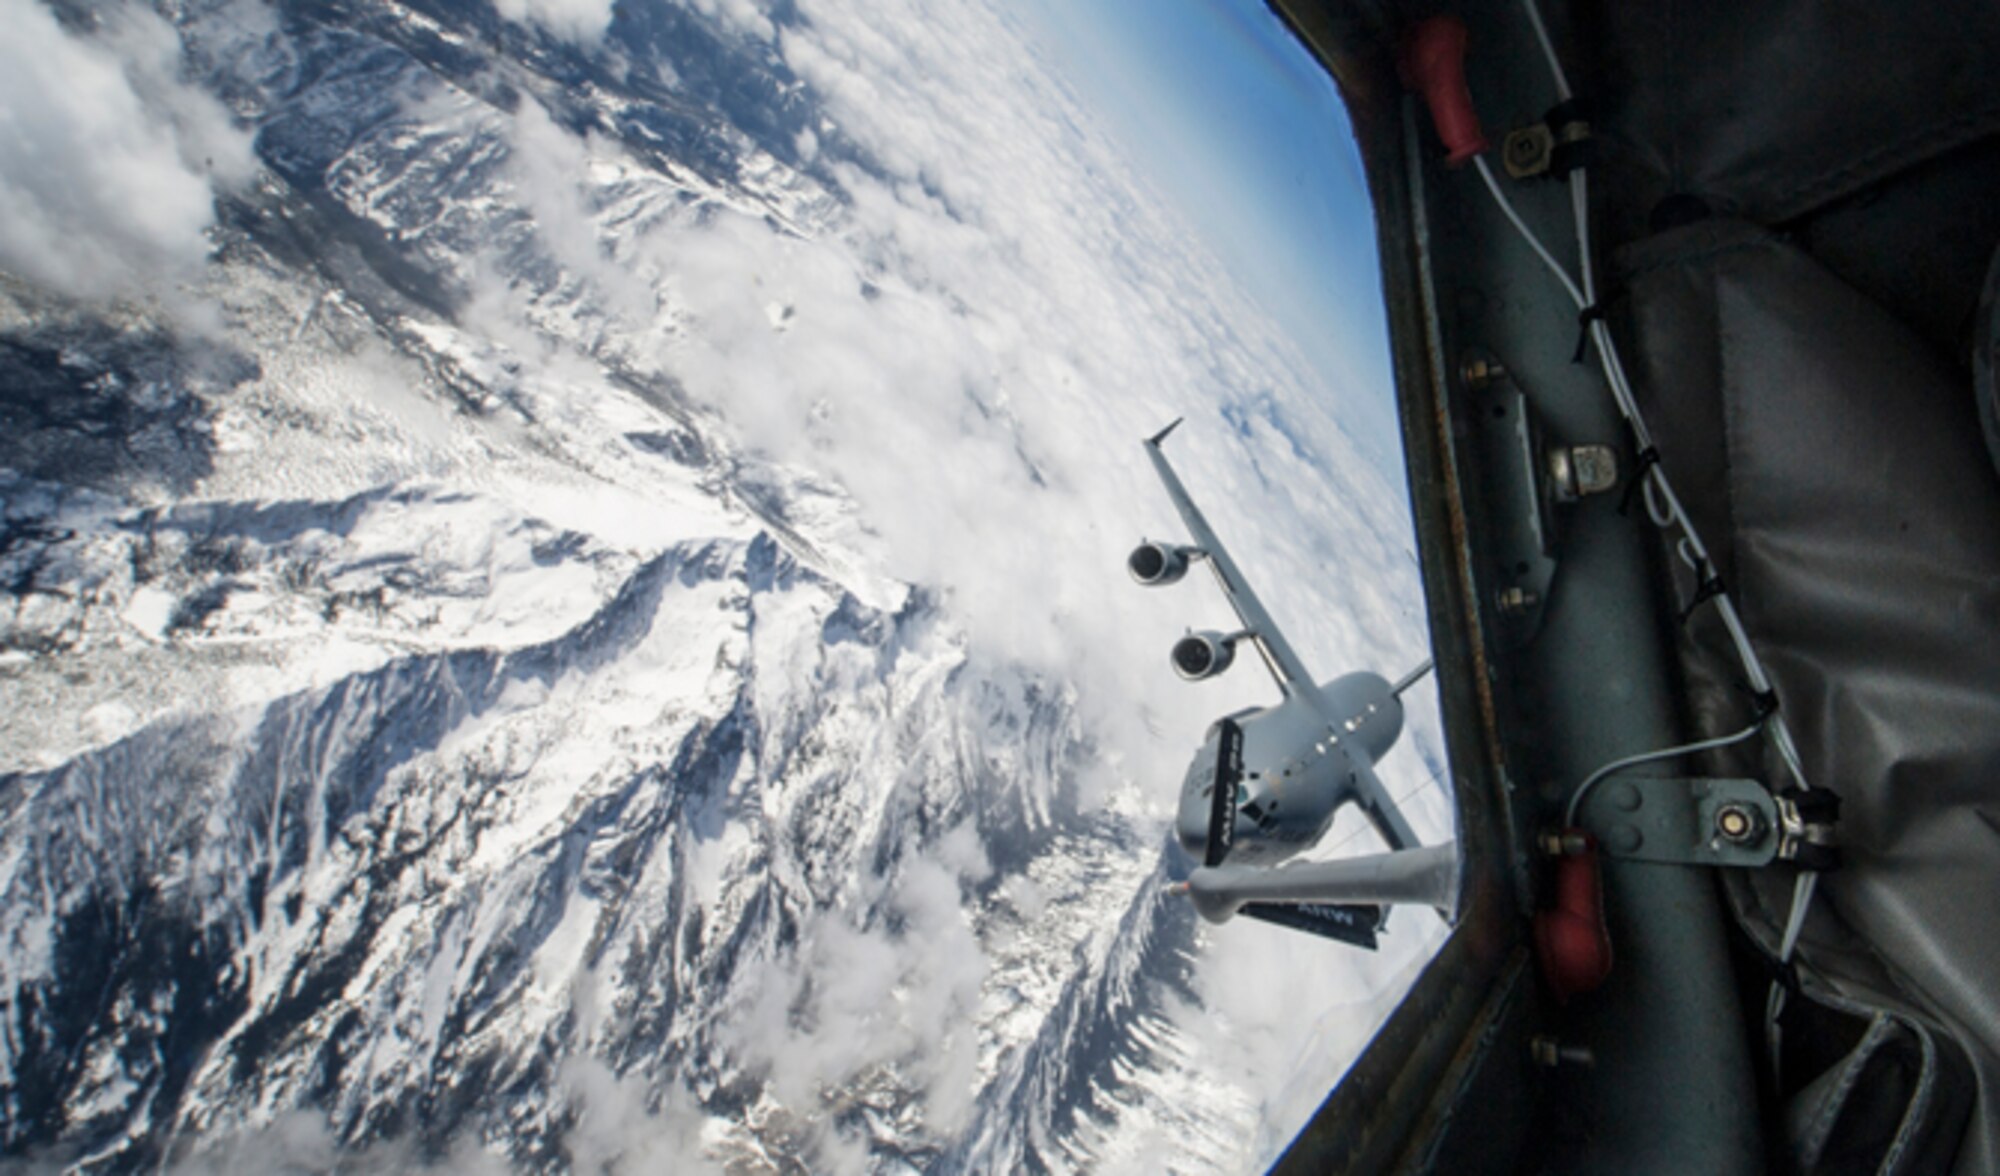 Lt. Col. Chad Marchesseault, the 92nd Operations Group deputy commander, flew a KC-135 Stratotanker from Fairchild Air Force Base, Wash., during an air refueling exercise over Washington April 5, 2016. One of the receivers, a C-17 Globemaster hailing from Joint Base Lewis-McChord, Wash., was flown by Chad’s youngest brother, Capt. Lance Marchesseault, the 62nd Operations Support Squadron airlift director. (U.S. Air Force photo/Airman 1st Class Sean Campbell)